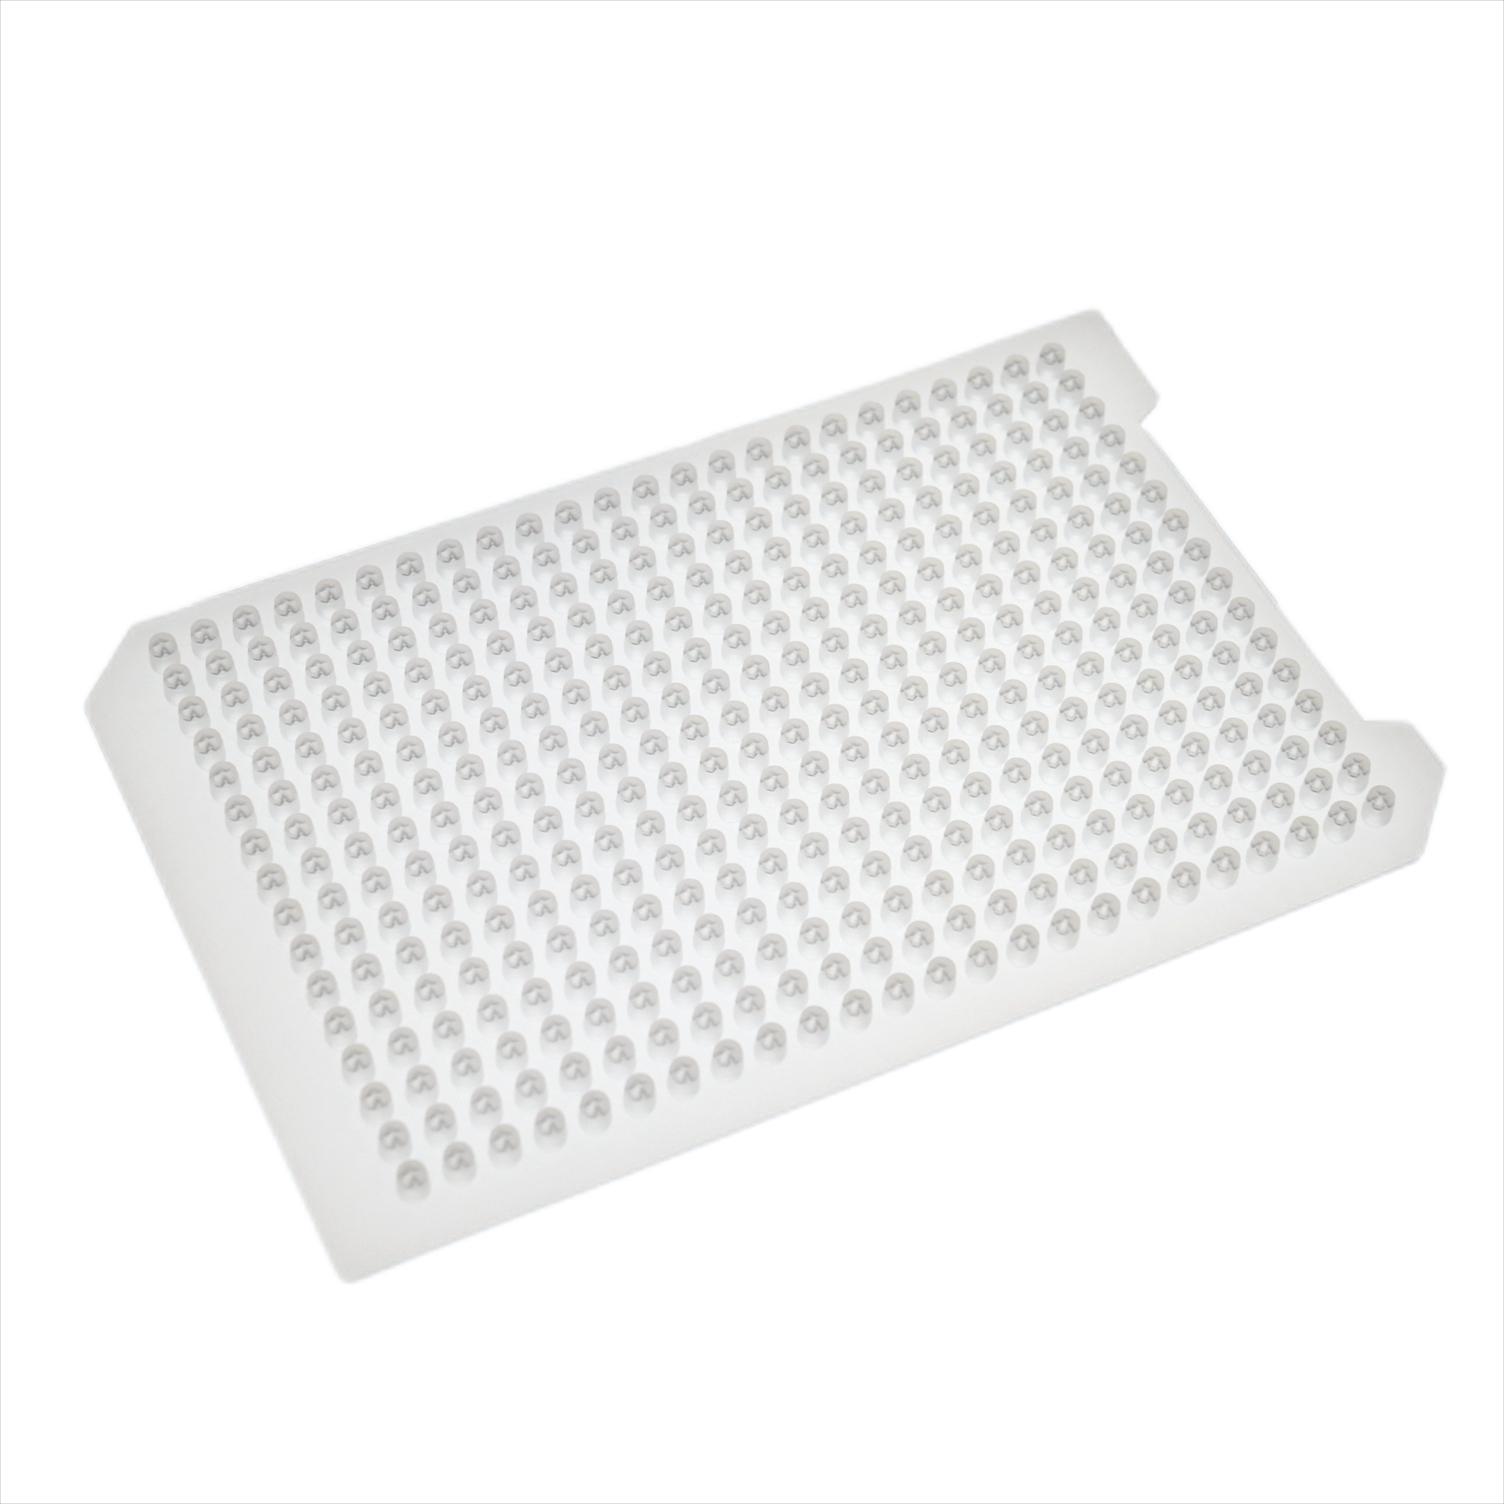 384 ROUND WELL SILICONE SEALING MAT (2)(1)